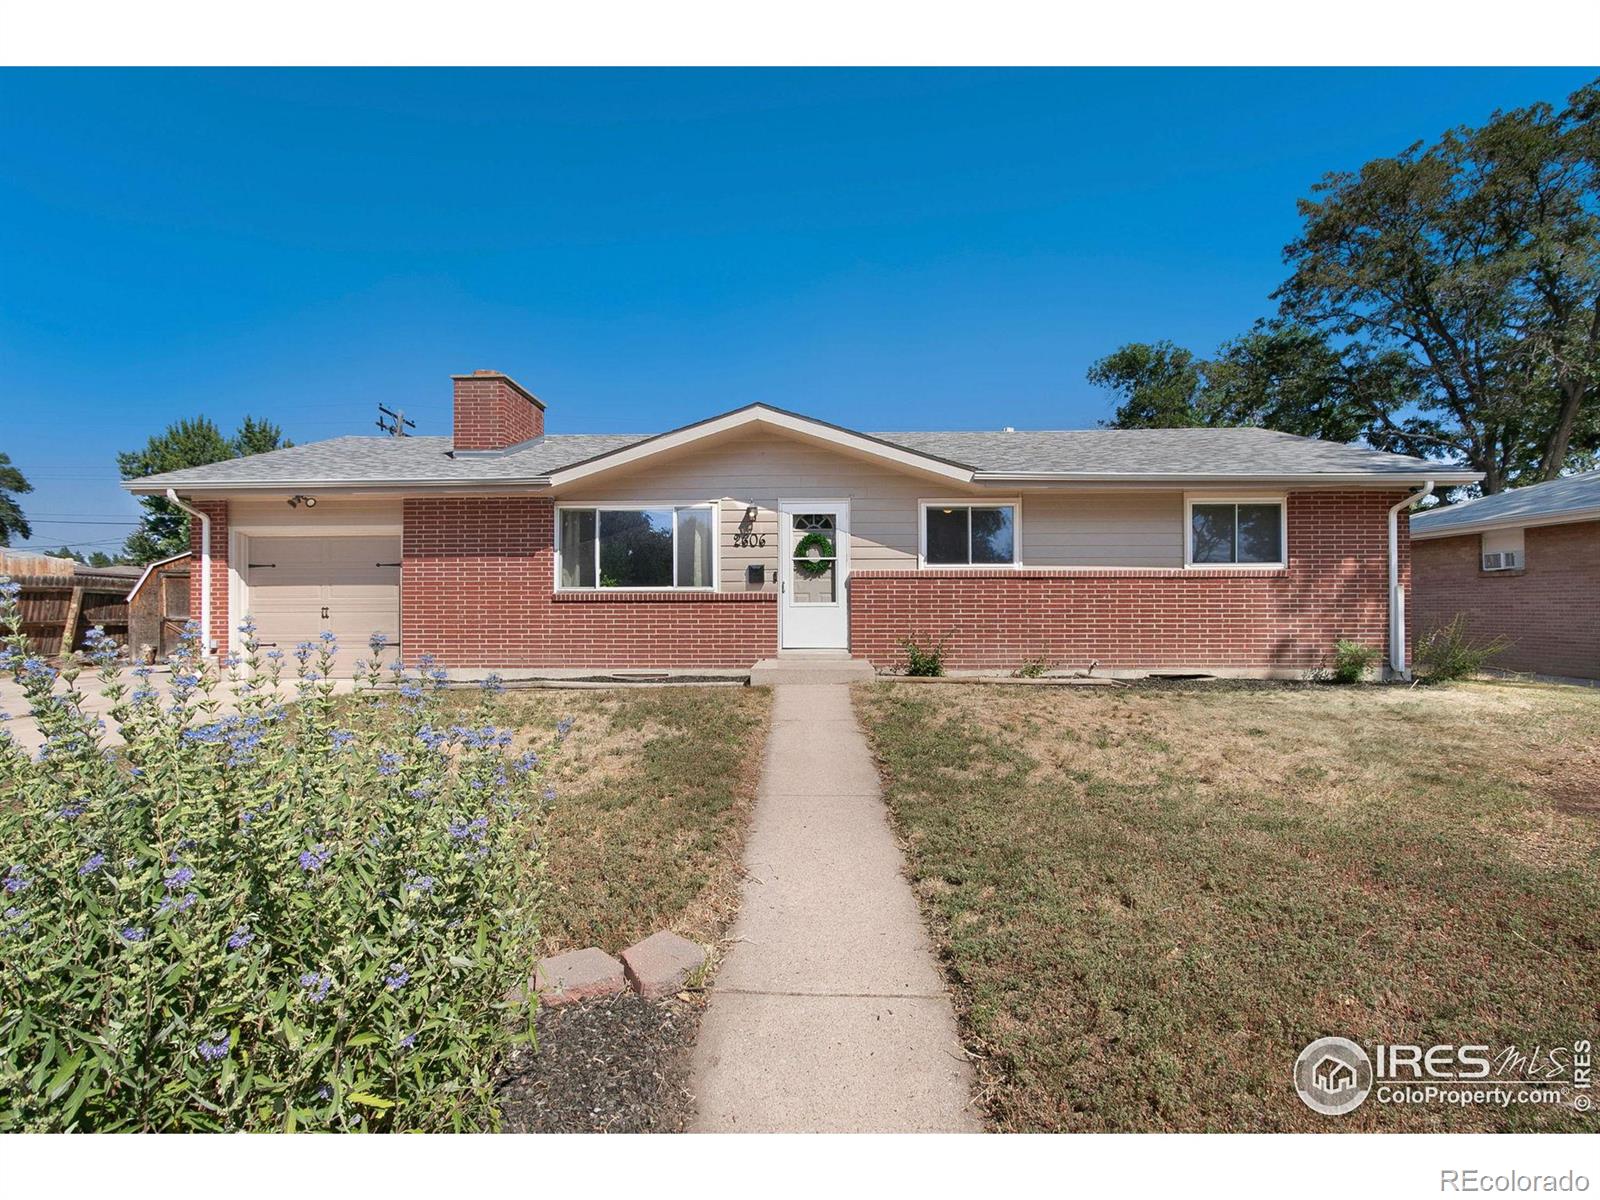 2606  13th Avenue, greeley MLS: 123456789995125 Beds: 3 Baths: 2 Price: $355,000